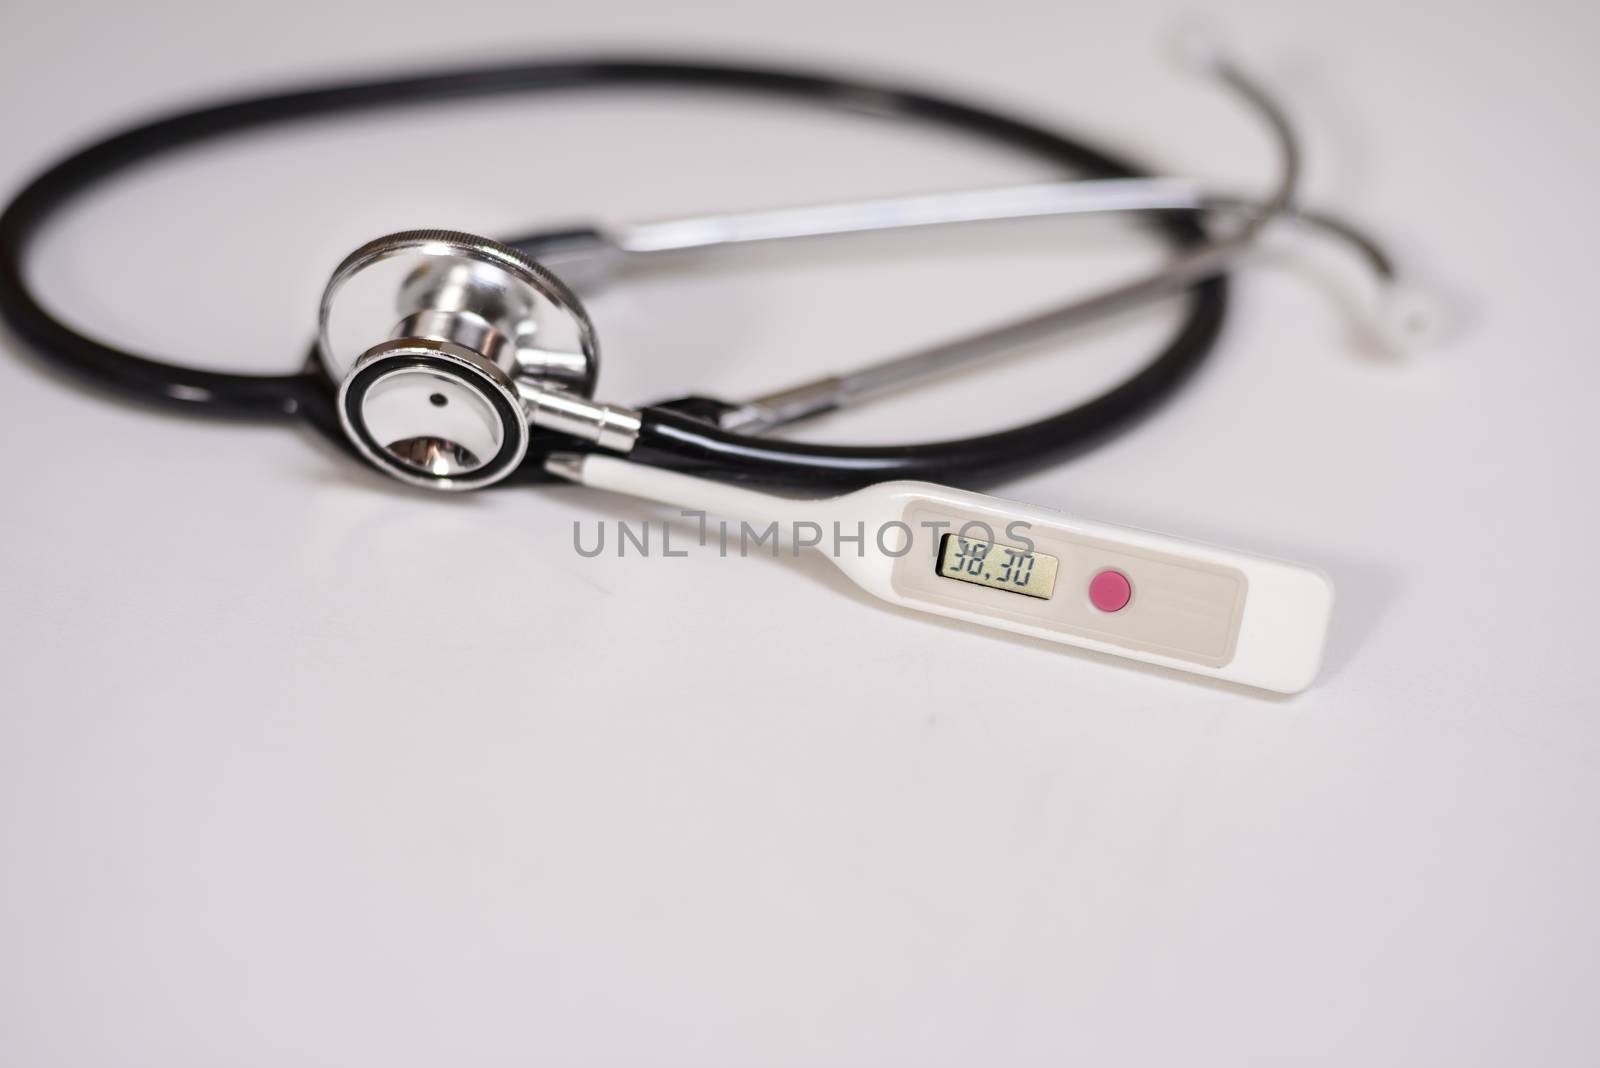 A thermometer showing high body temperature and stethoscope in background on white surface